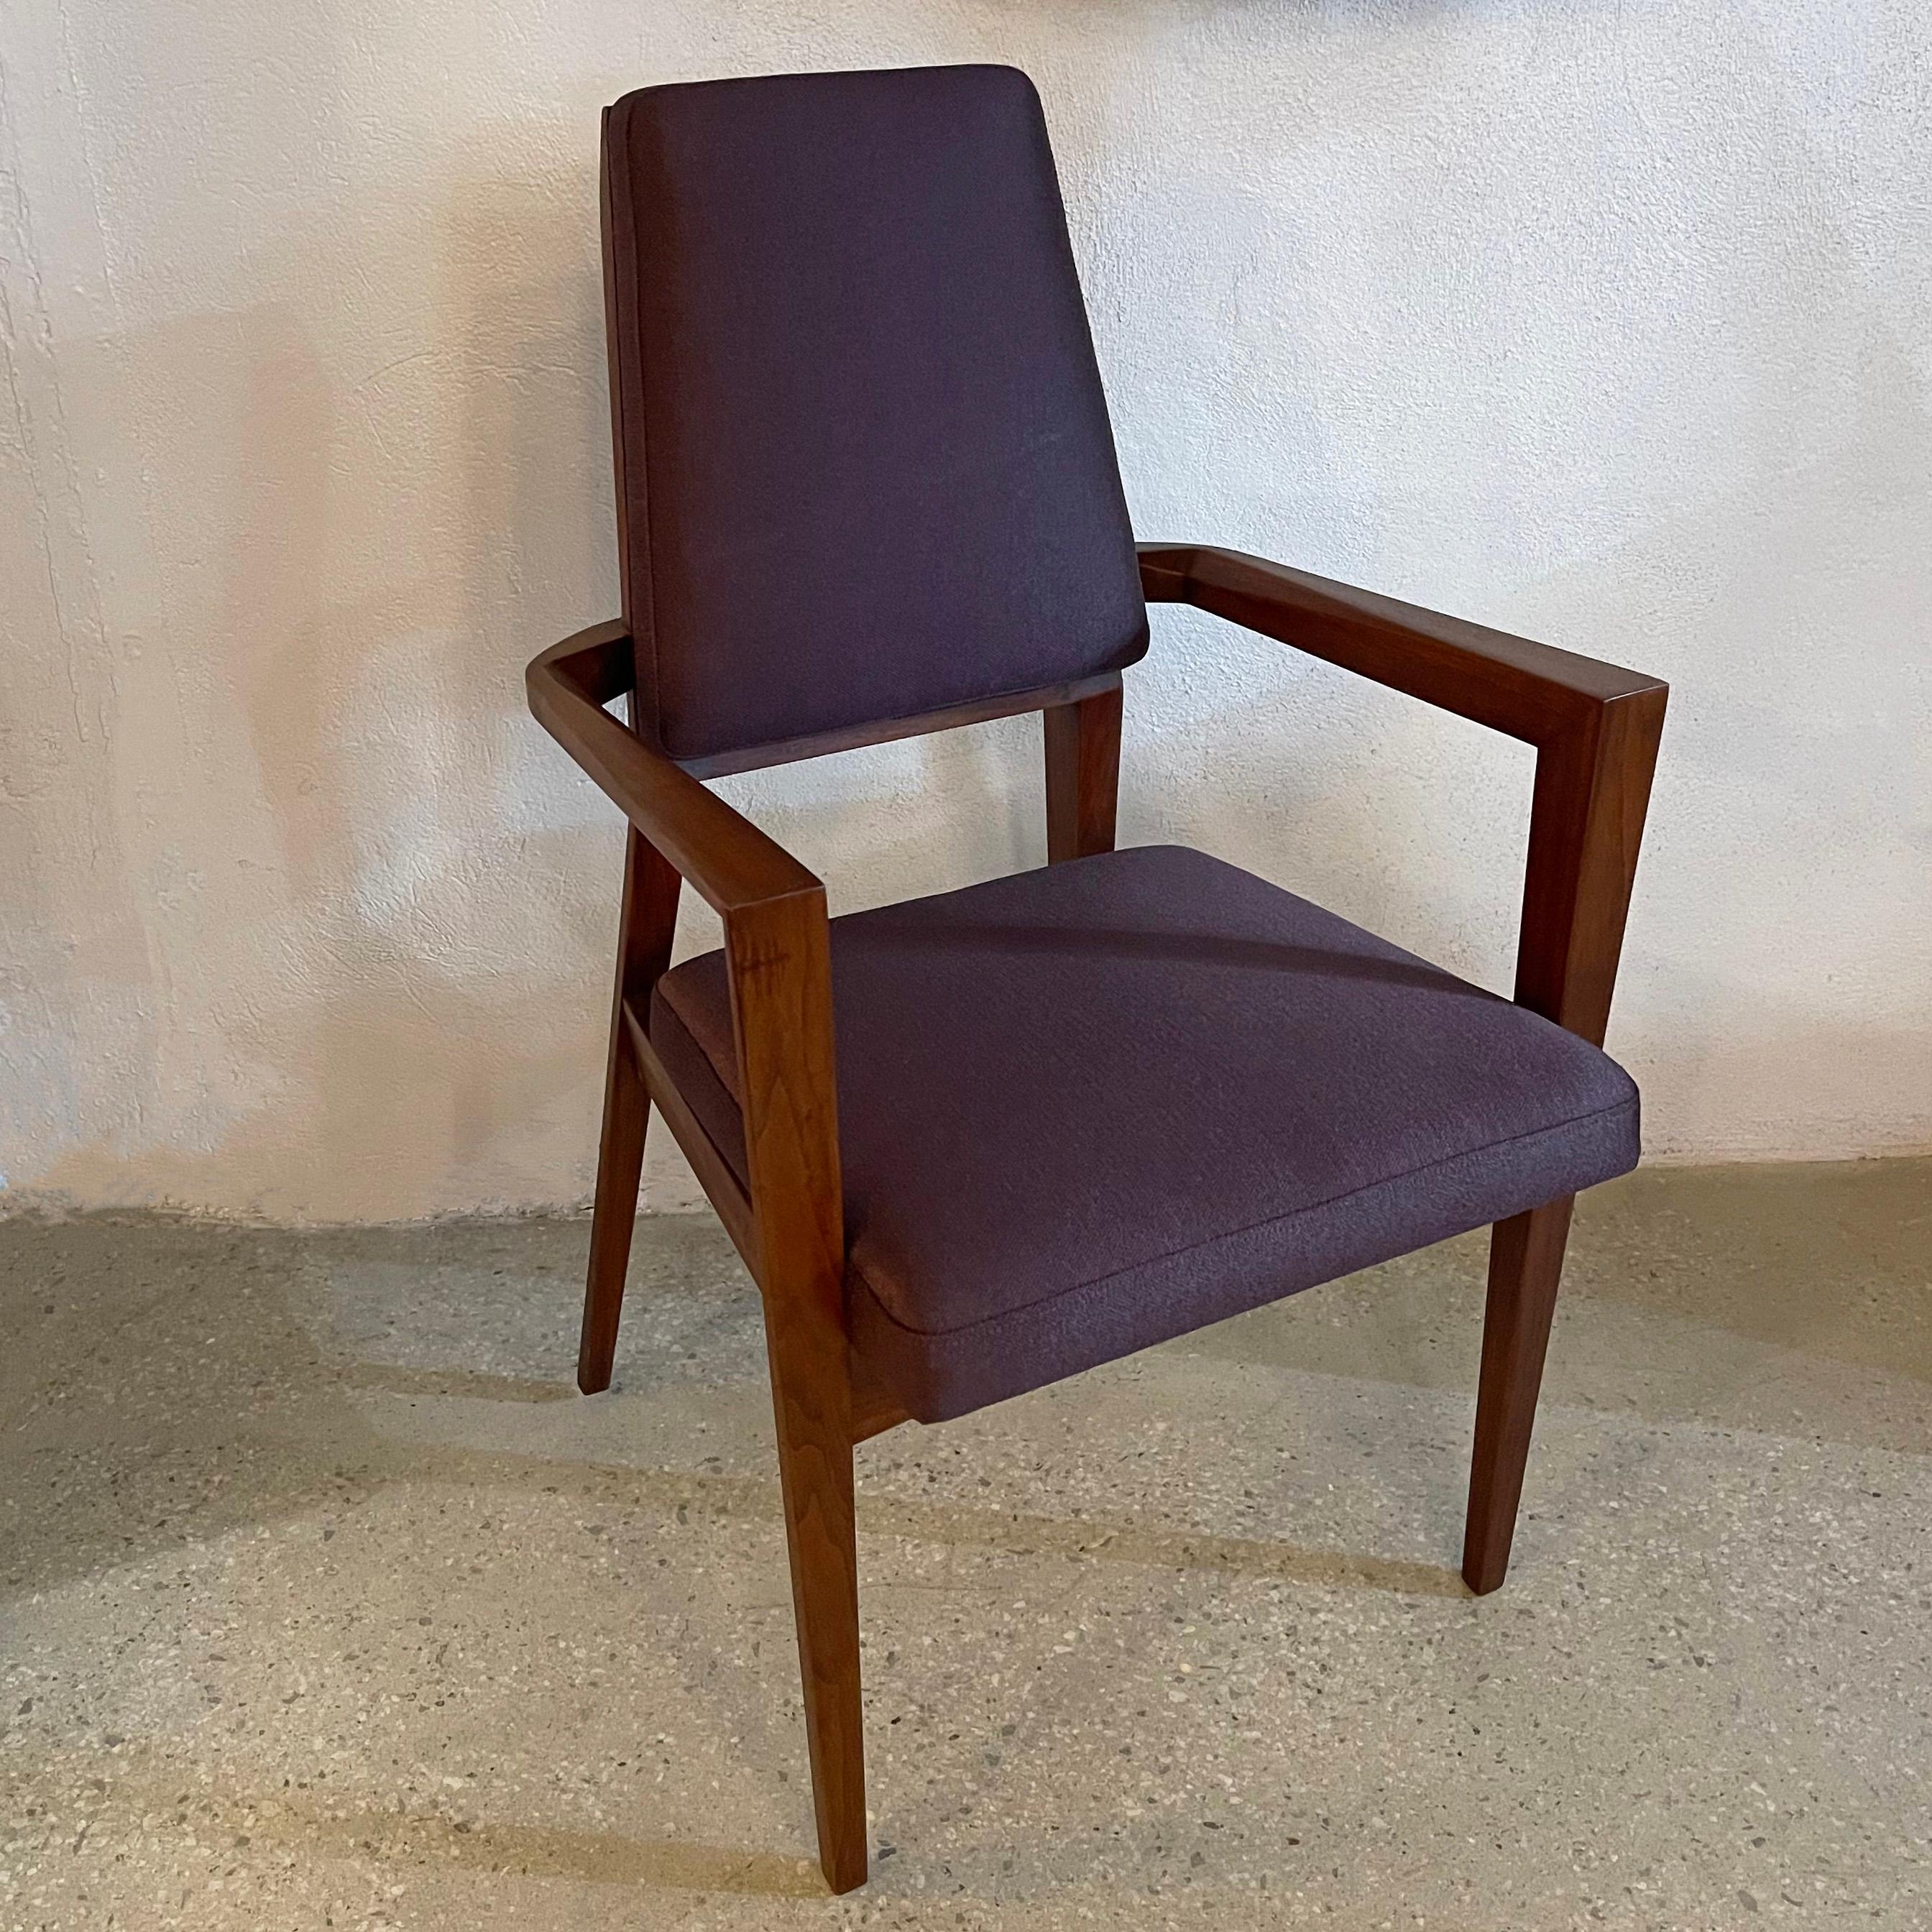 Stately, mid-century modern armchair by Marc Berge for Grosfeld House features a sculptural walnut frame with patterned beveled edges throughout. The seat and back are newly upholstered in deep, rich aubergine linen with a slight sheen to the